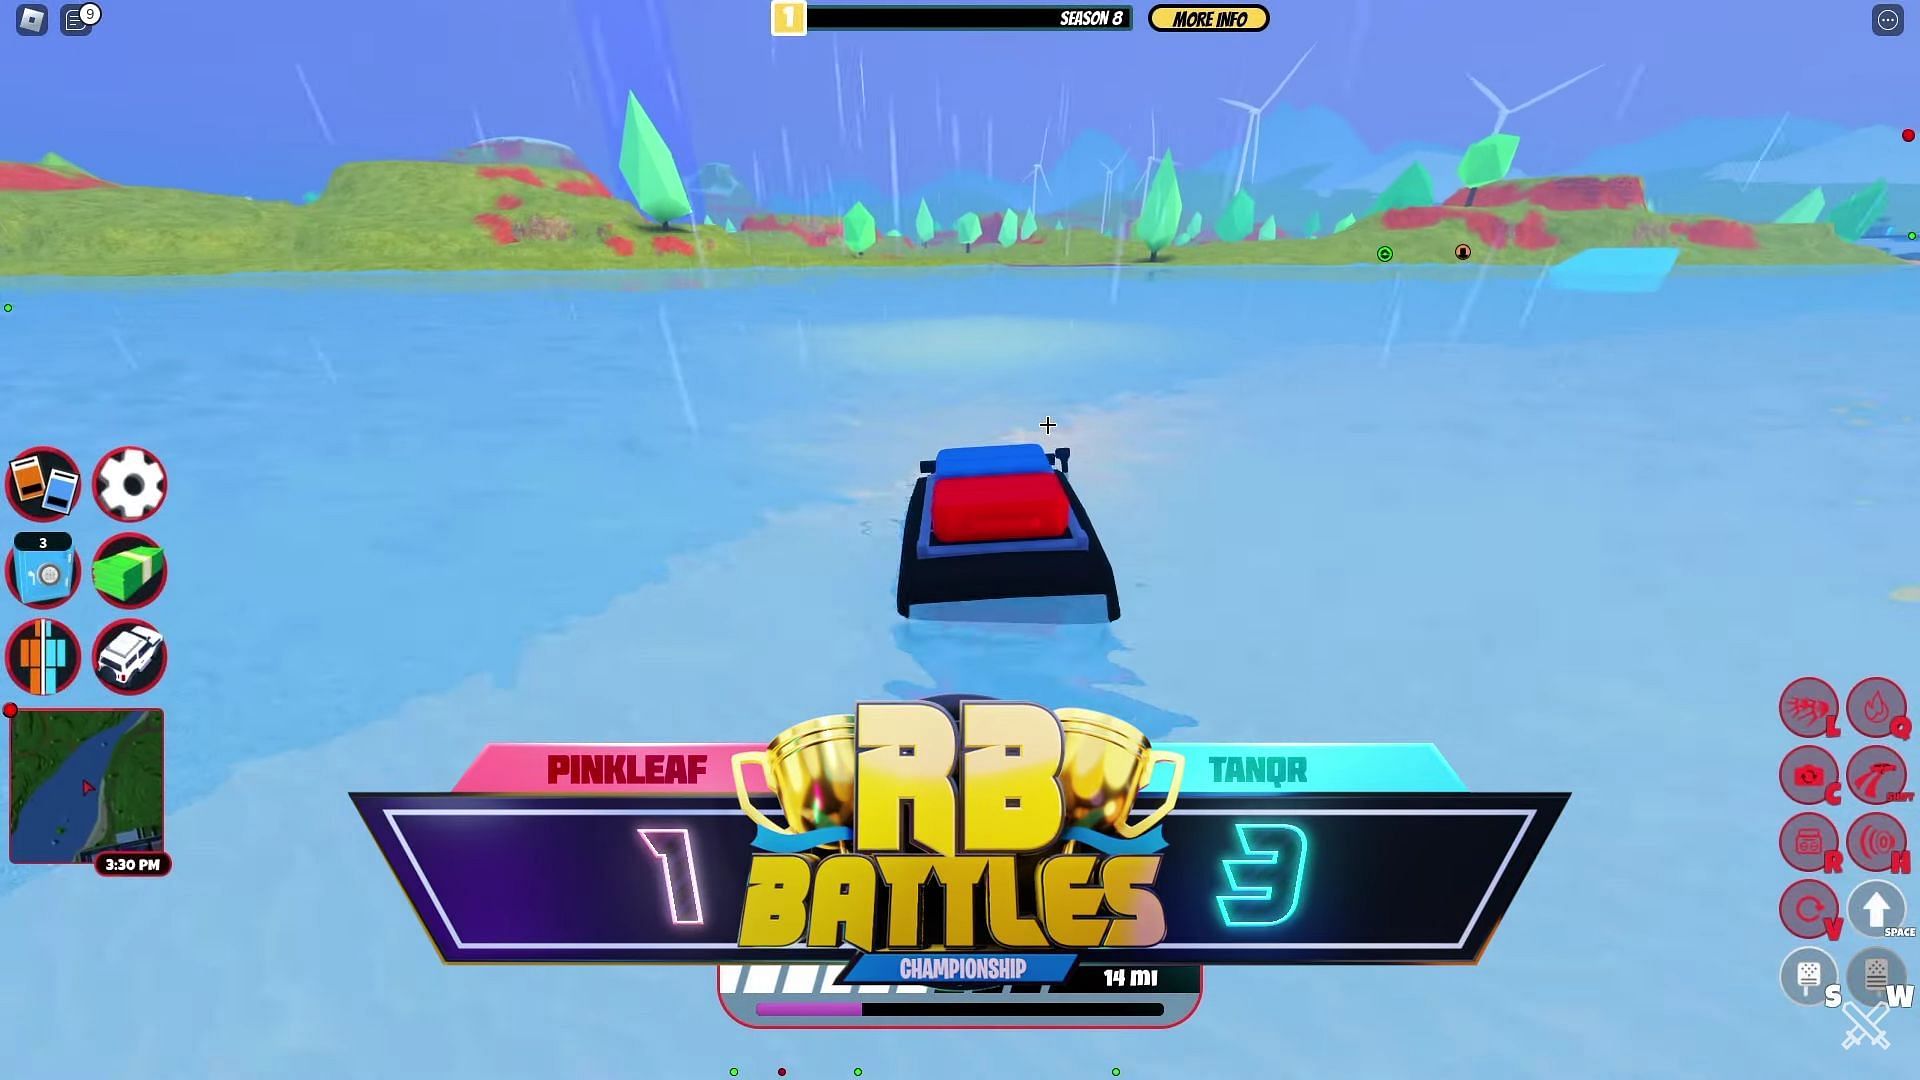 TanqR after winning the round (Image via Roblox Battles/YouTube)